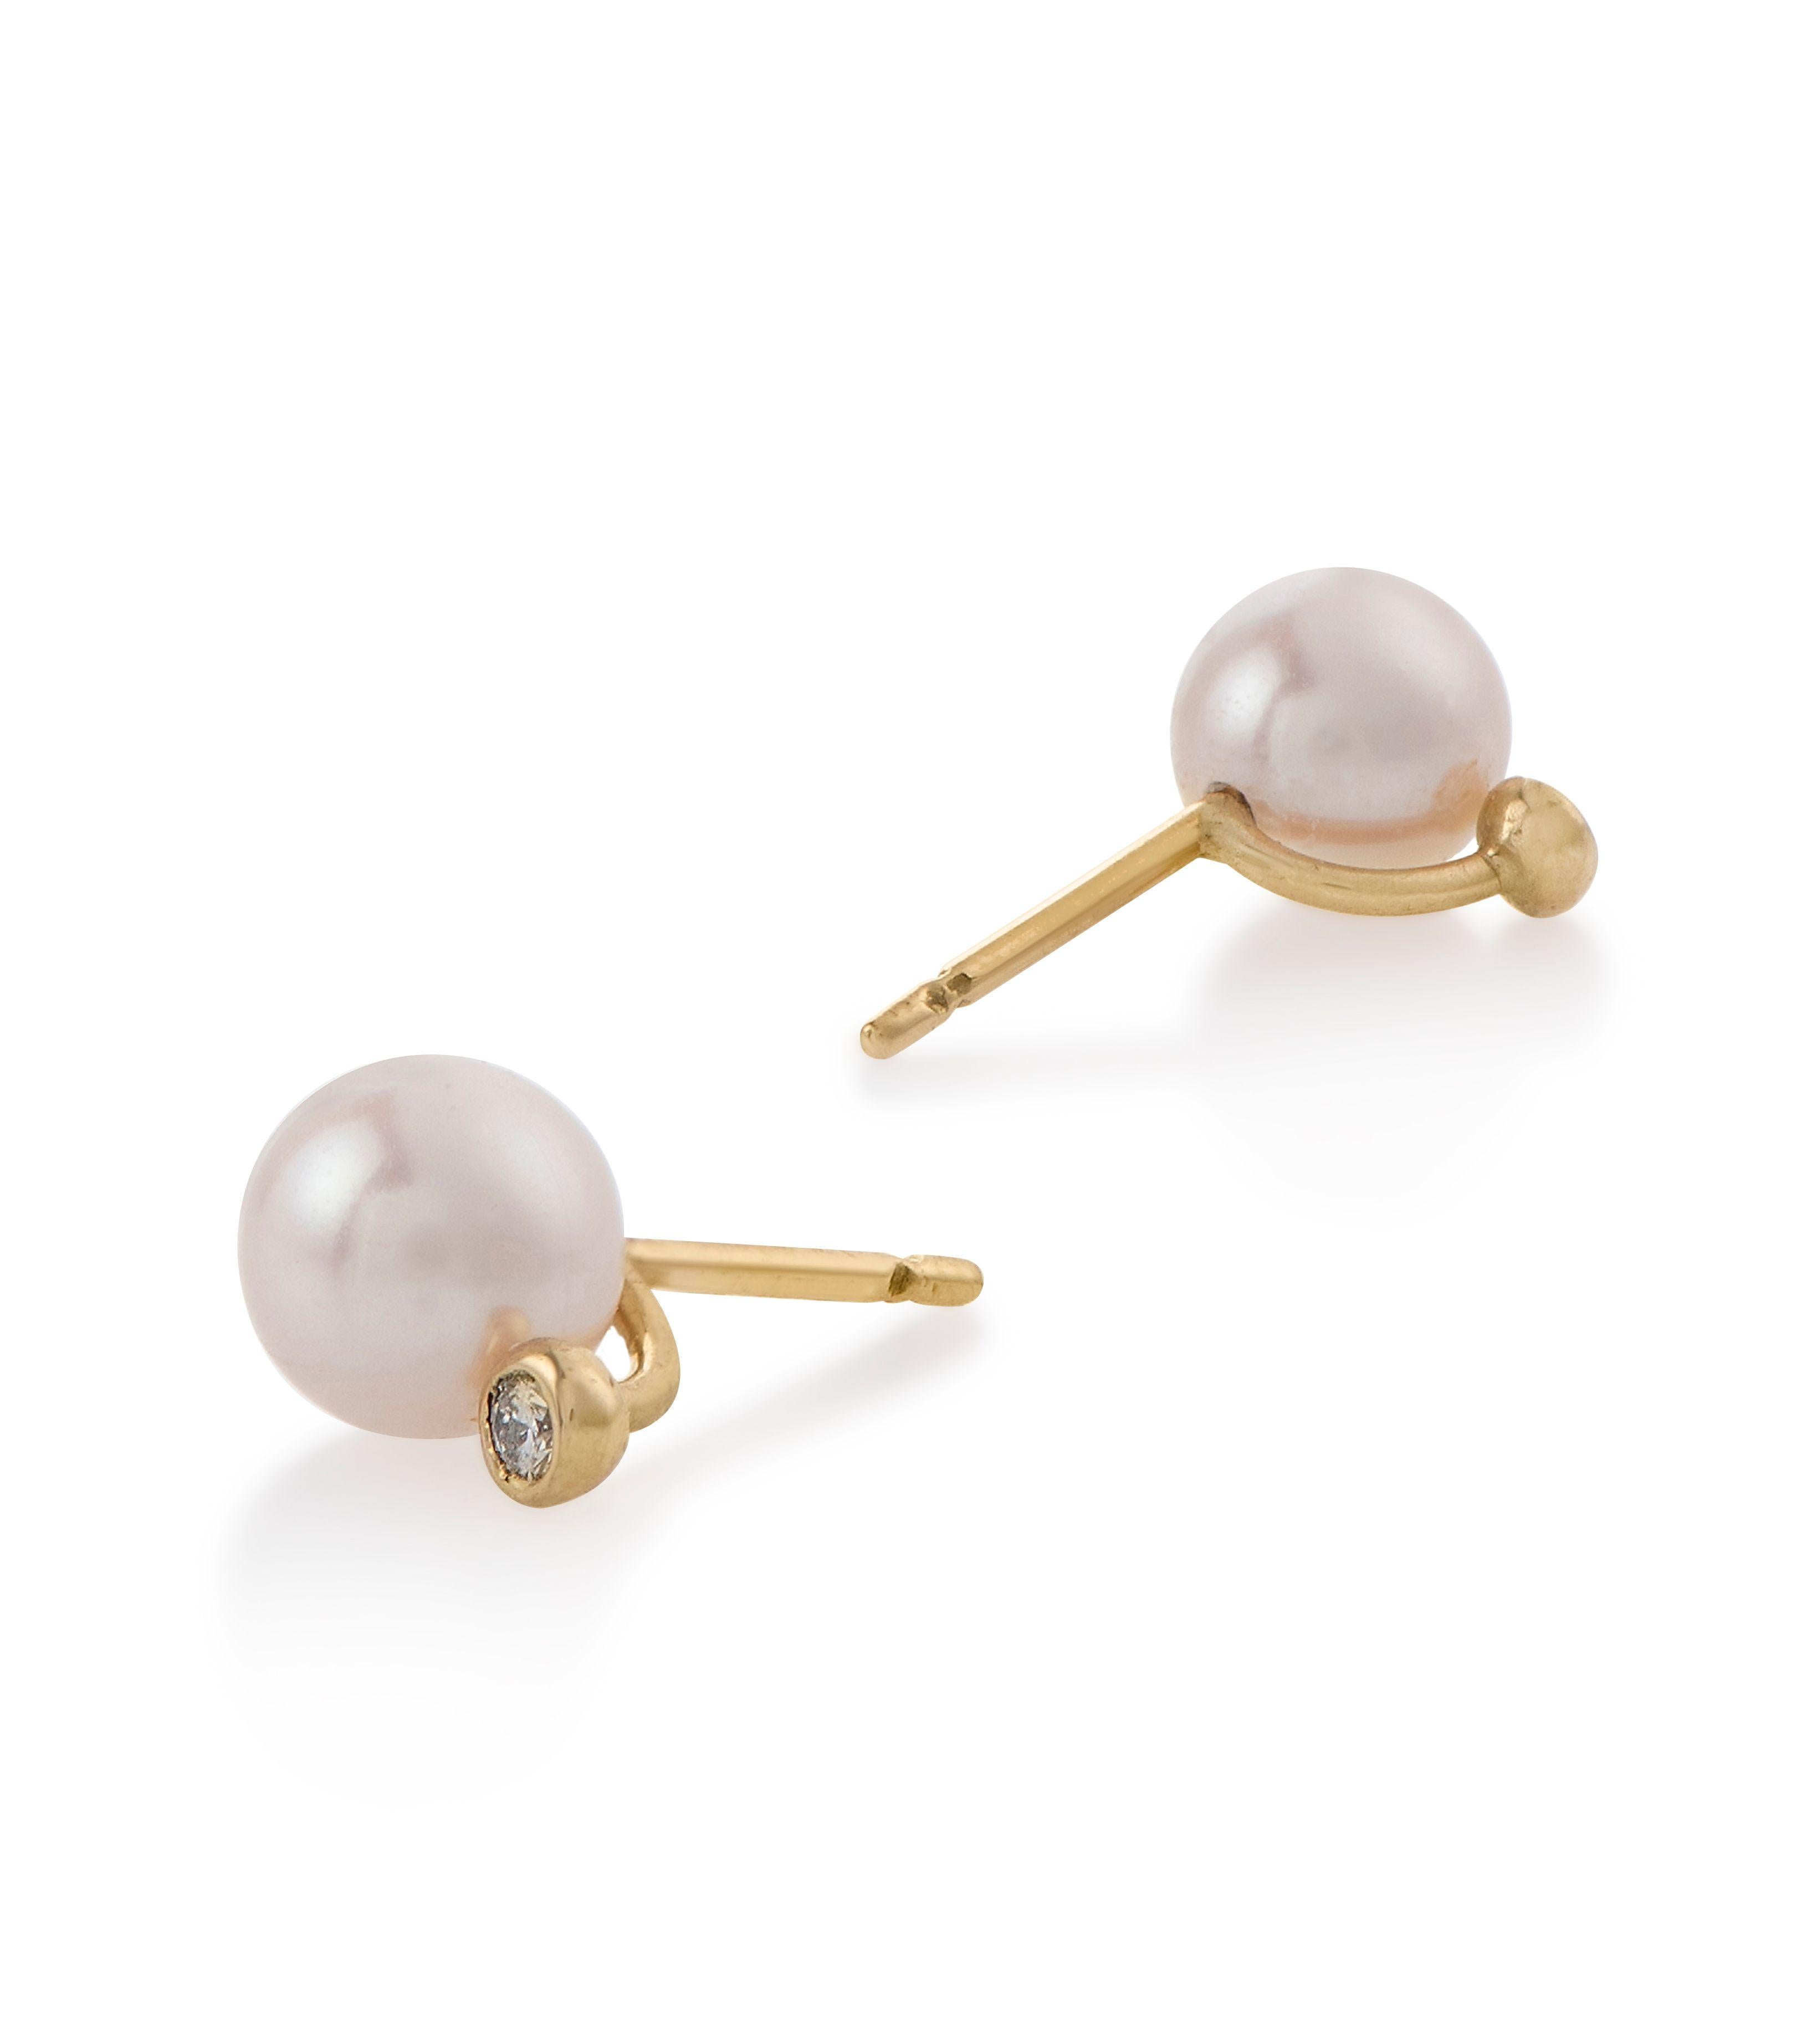 These chic and timeless studs, are the perfect everyday pair of earrings. They are set with lustrous pearls and beautifully complimented by a pair of glimmering diamonds. Wear them with the diamond facing diagonally on the ear for a more playful